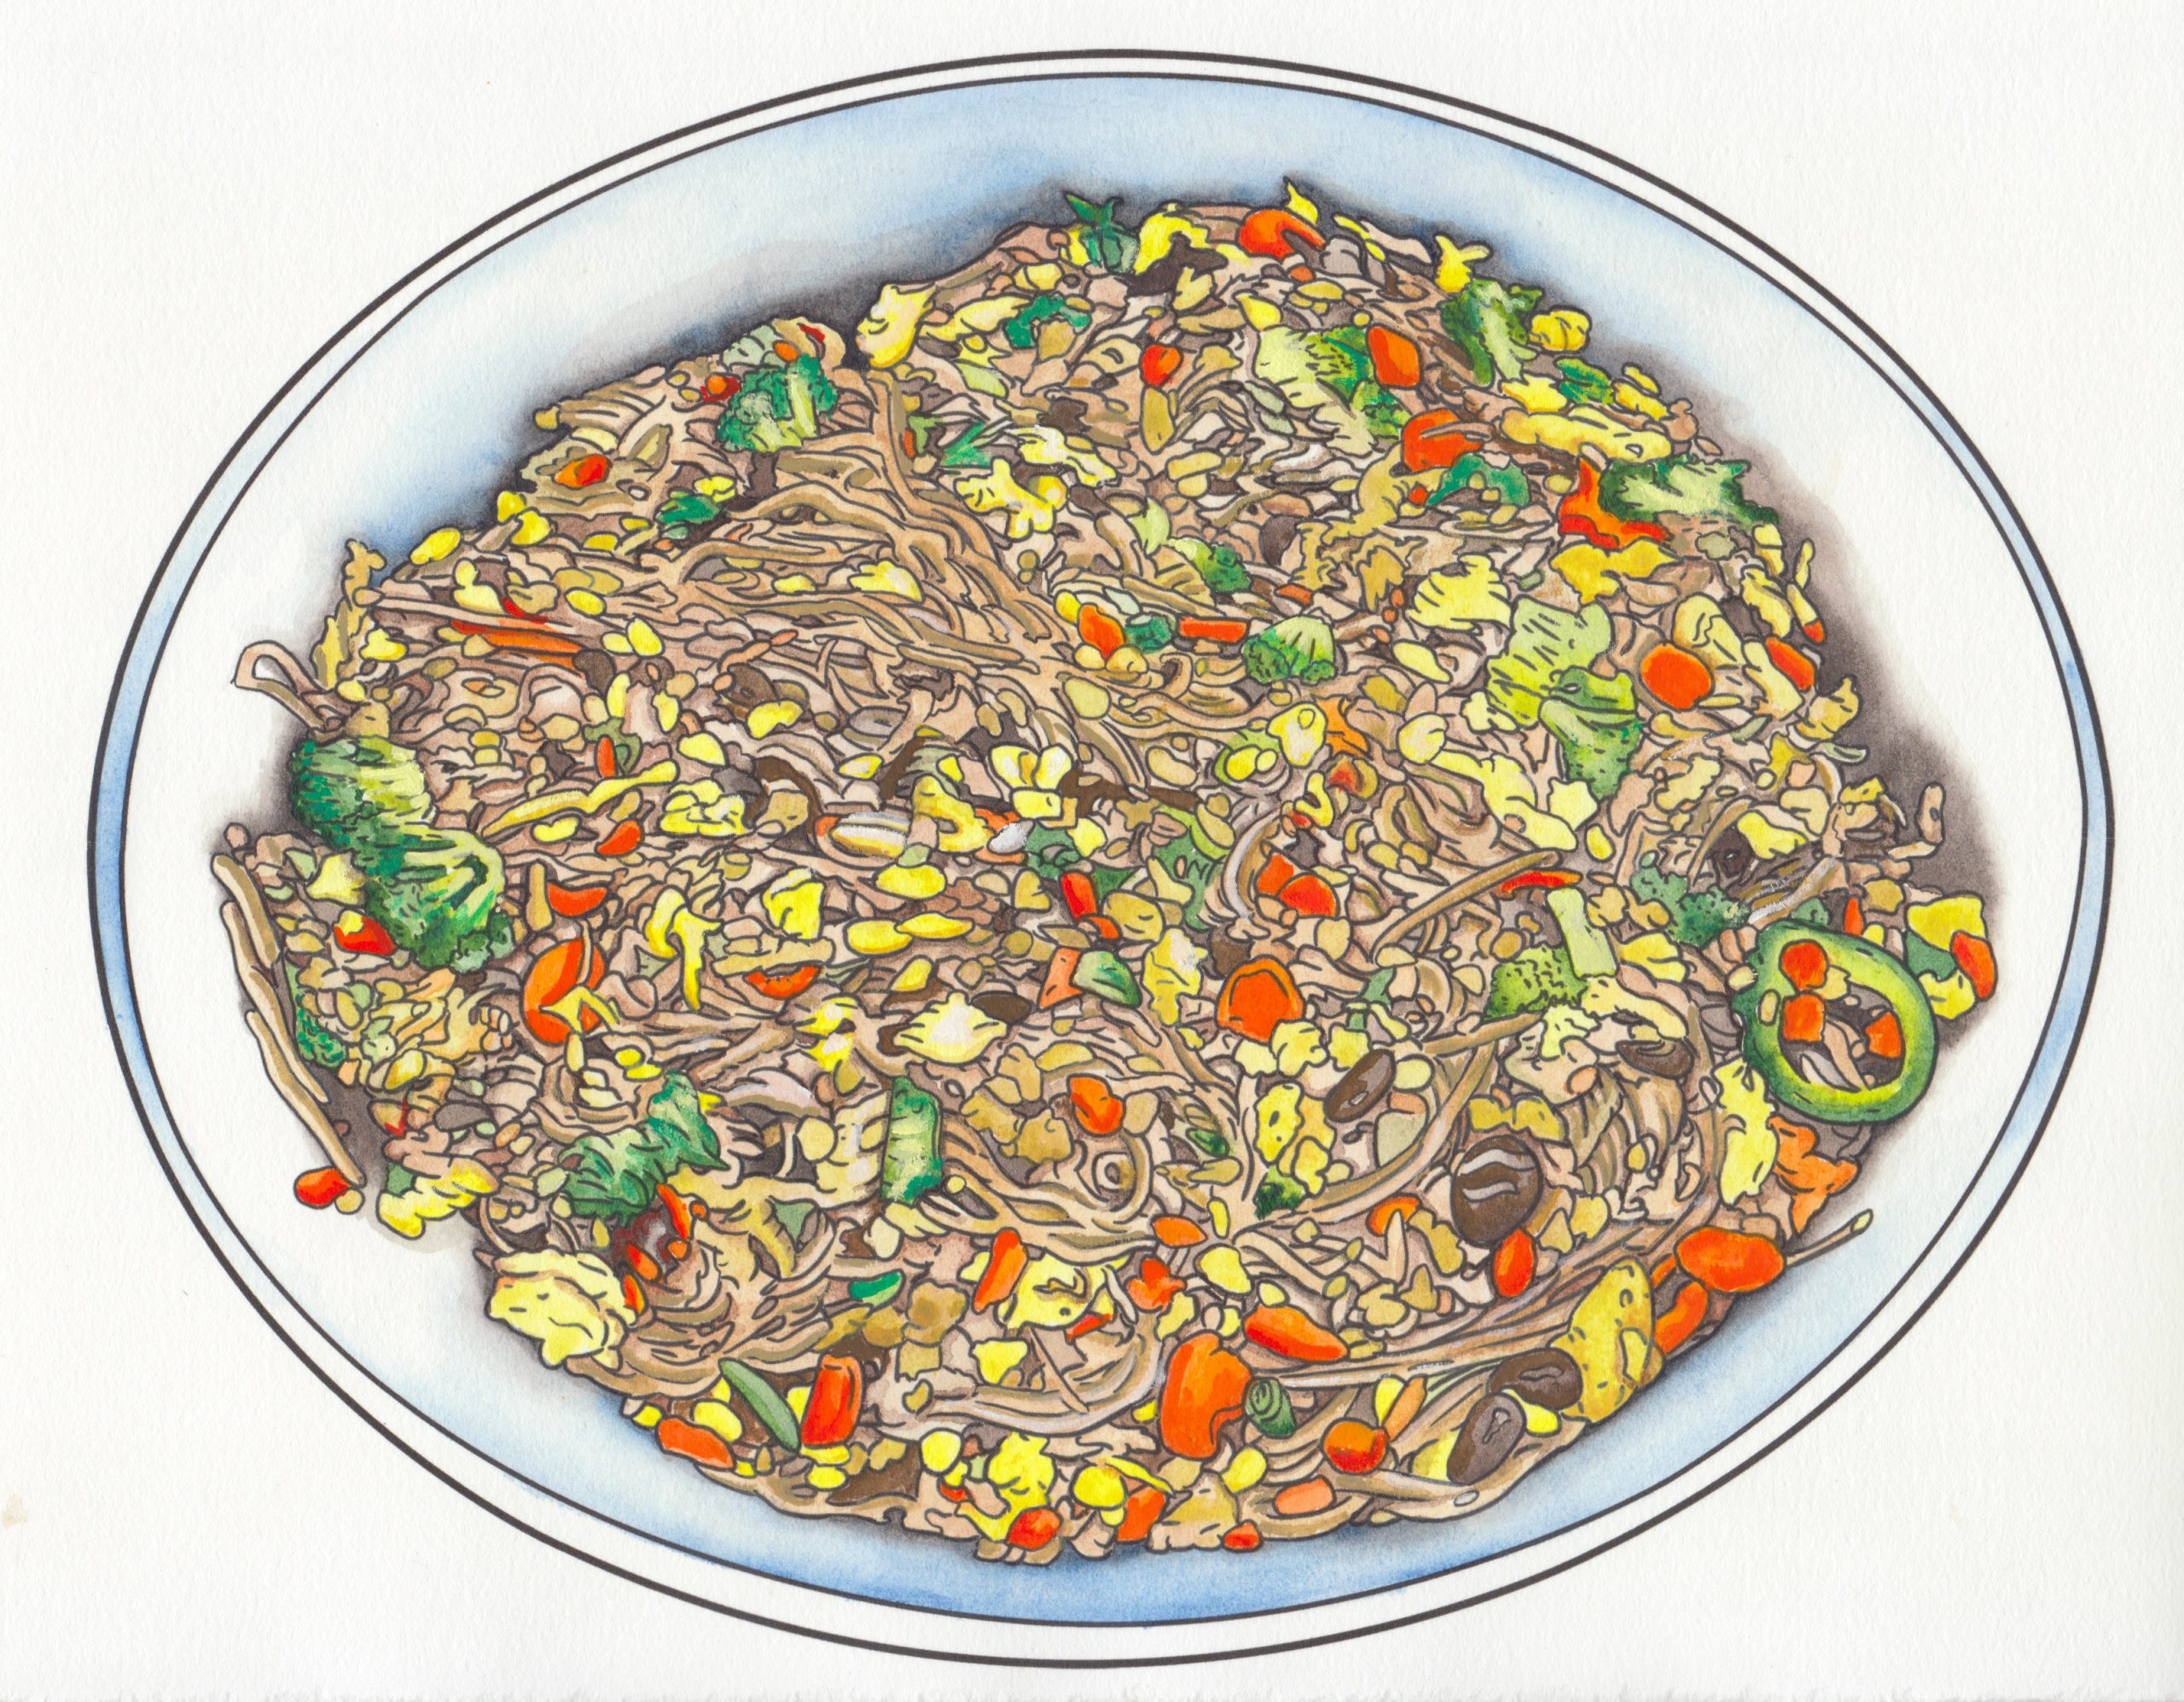  A round white bowl is filled with a busy composition of the noodles, vegetables, meat, and egg that make up the ground pork chapjae. The page surrounding the bowl has been left blank.The shadows in the bowl are subtle washes of blue and black watercolor. The chapjae is illustrated in detail contour and painted in browns with pops of orange, yellow, and green for the eggs and veggies.